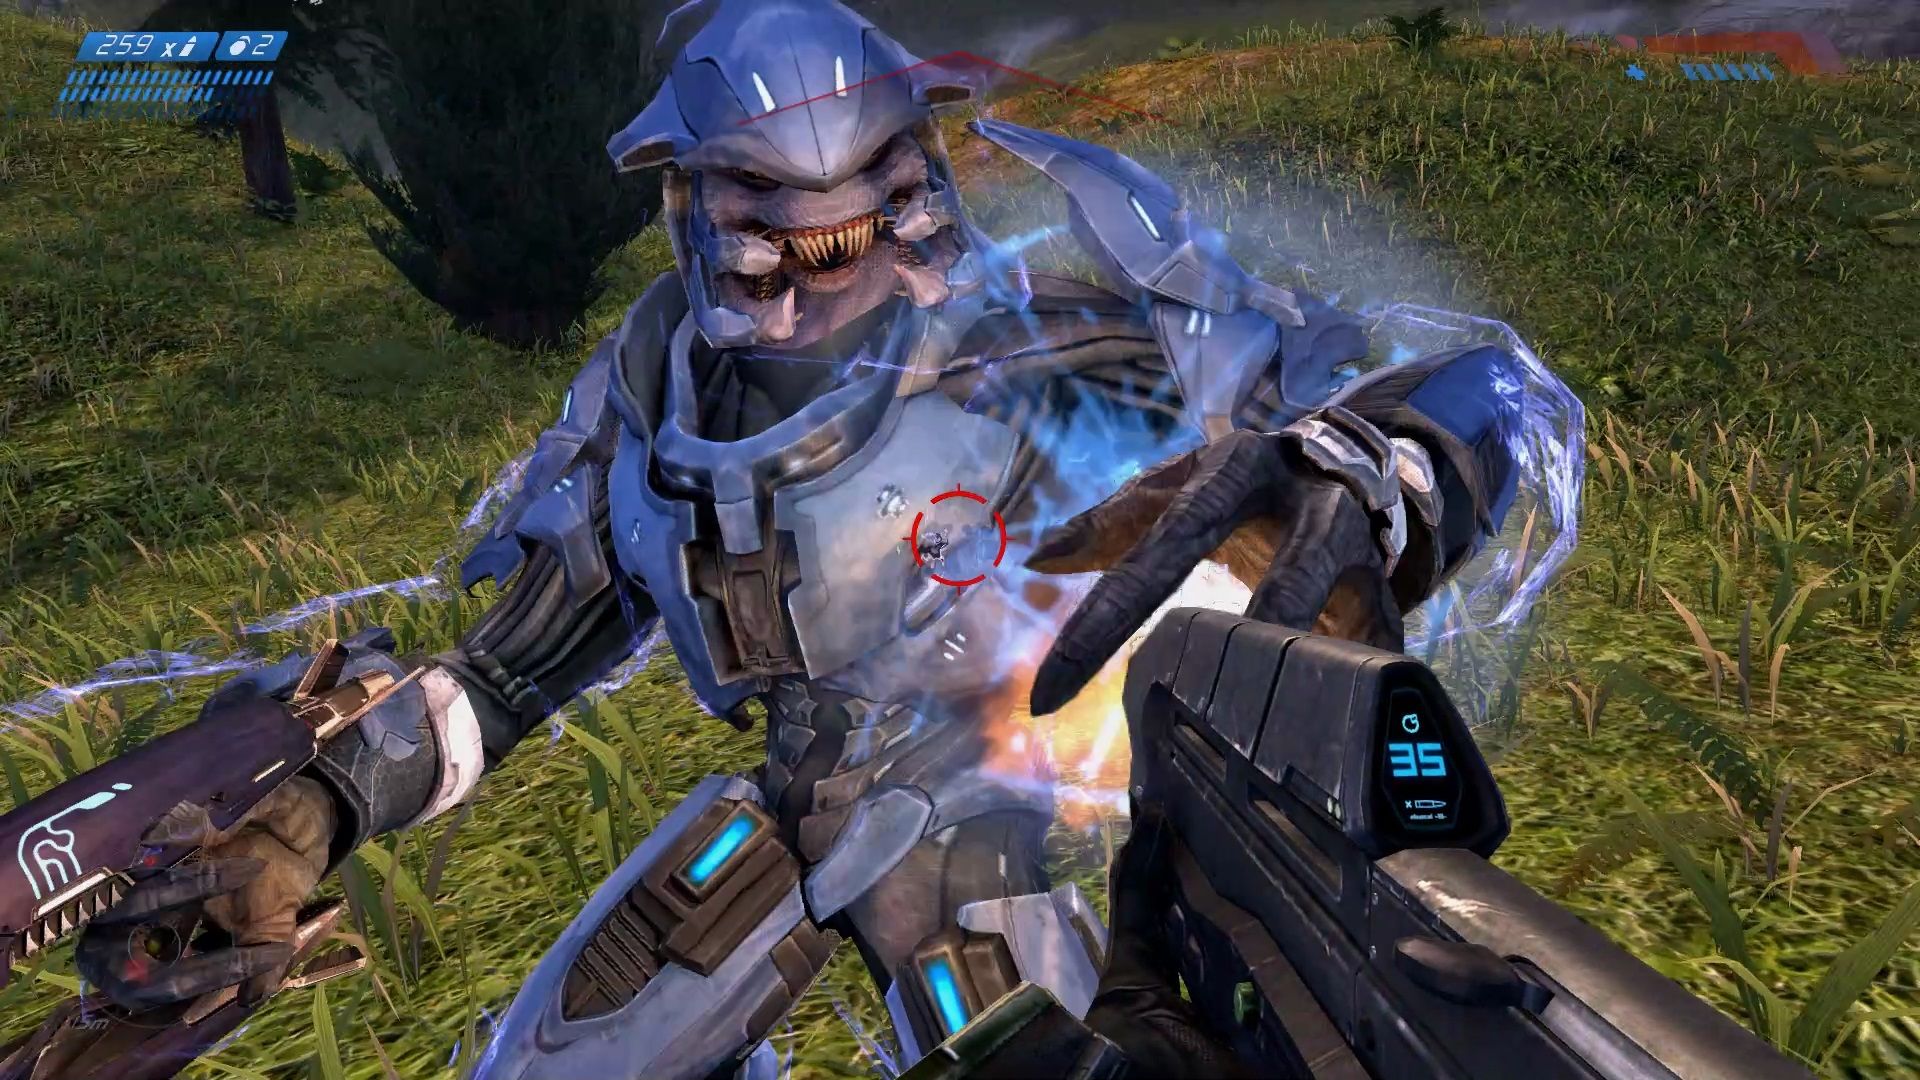 Halo: The Master Chief Collection – Halo: Combat Evolved Anniversary review